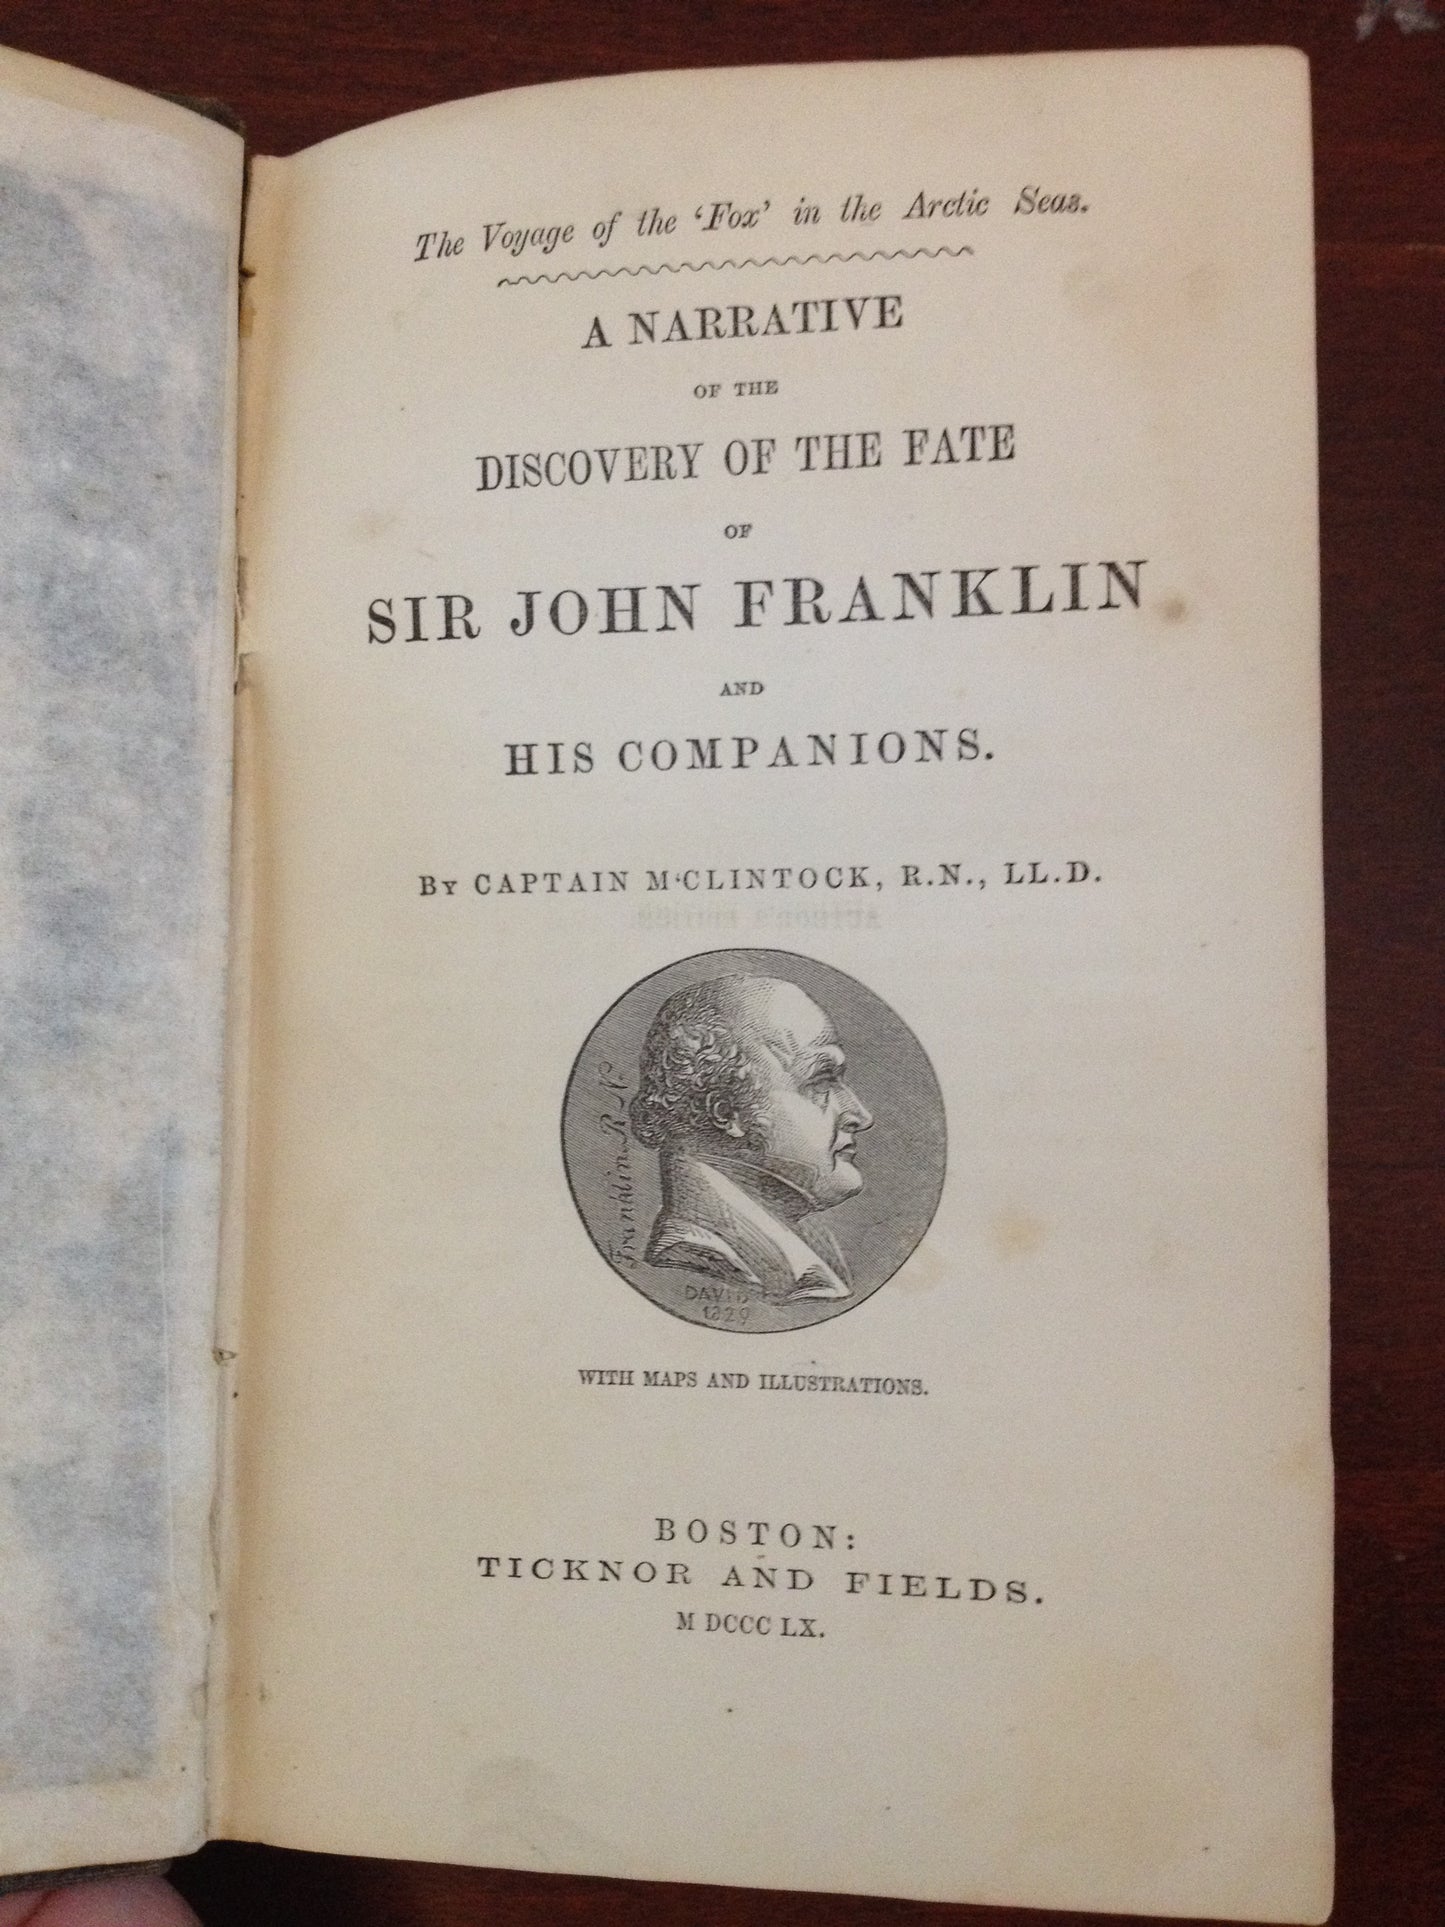 A NARRATIVE - DISCOVERY FATE OF SIR JOHN FRANKLIN  - CAPTAIN M.CLINTOCK